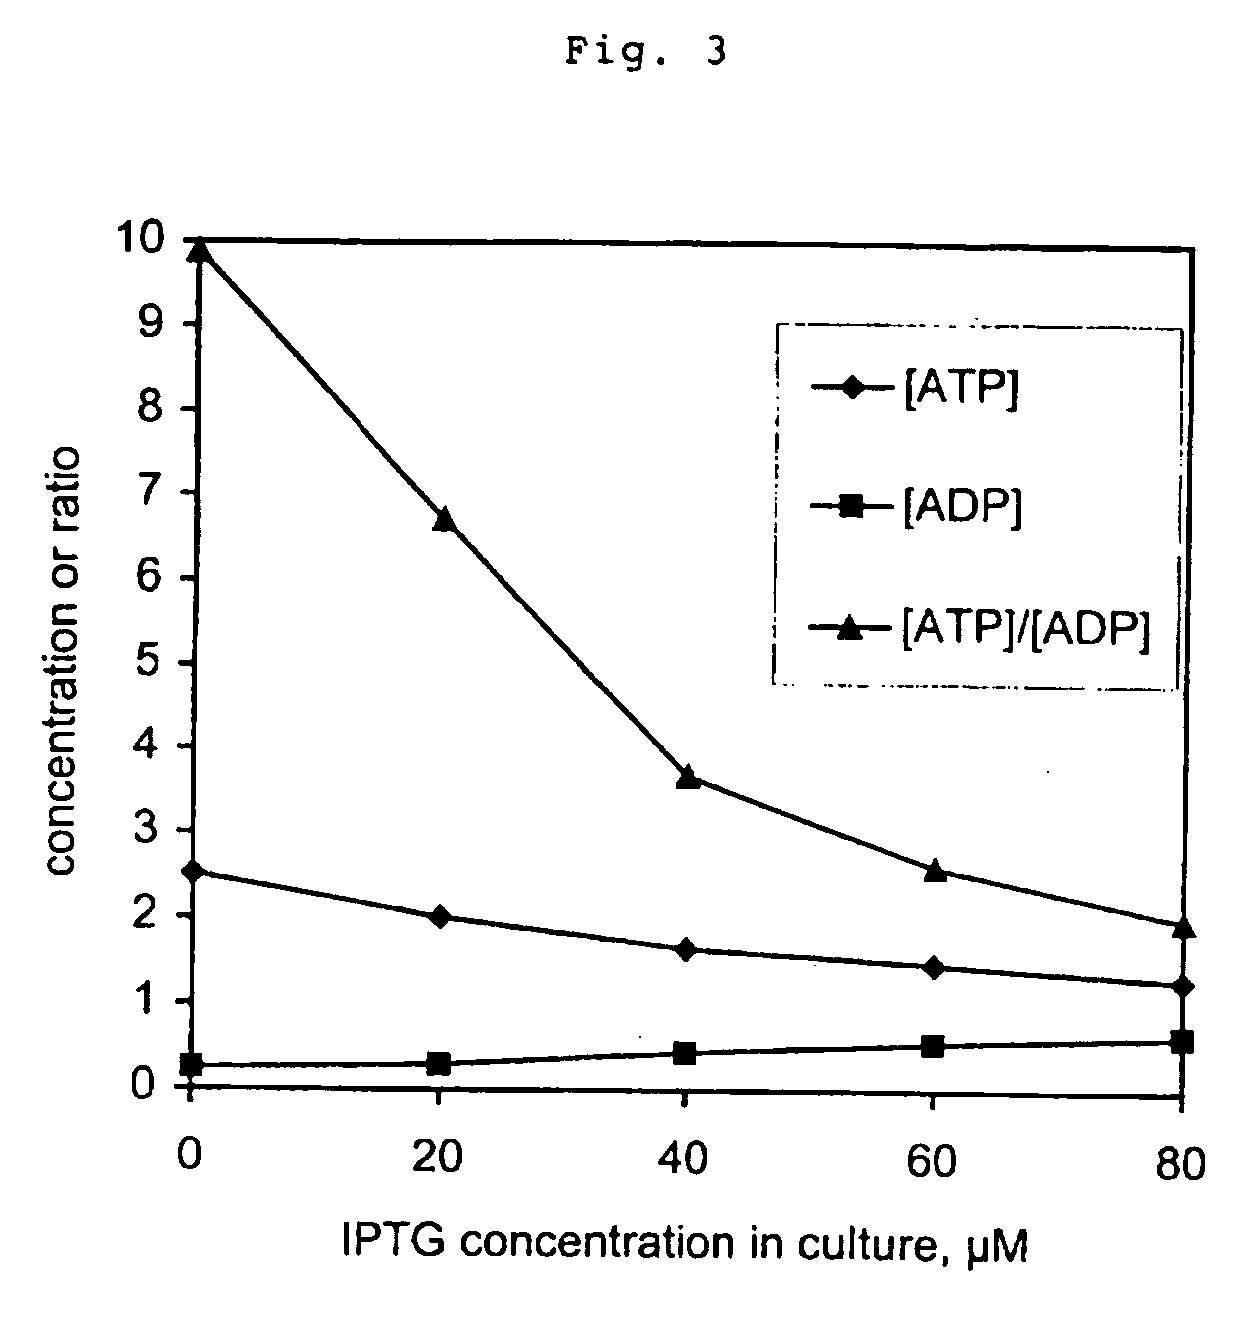 Method of improving the production of biomass or a desired product from a cell